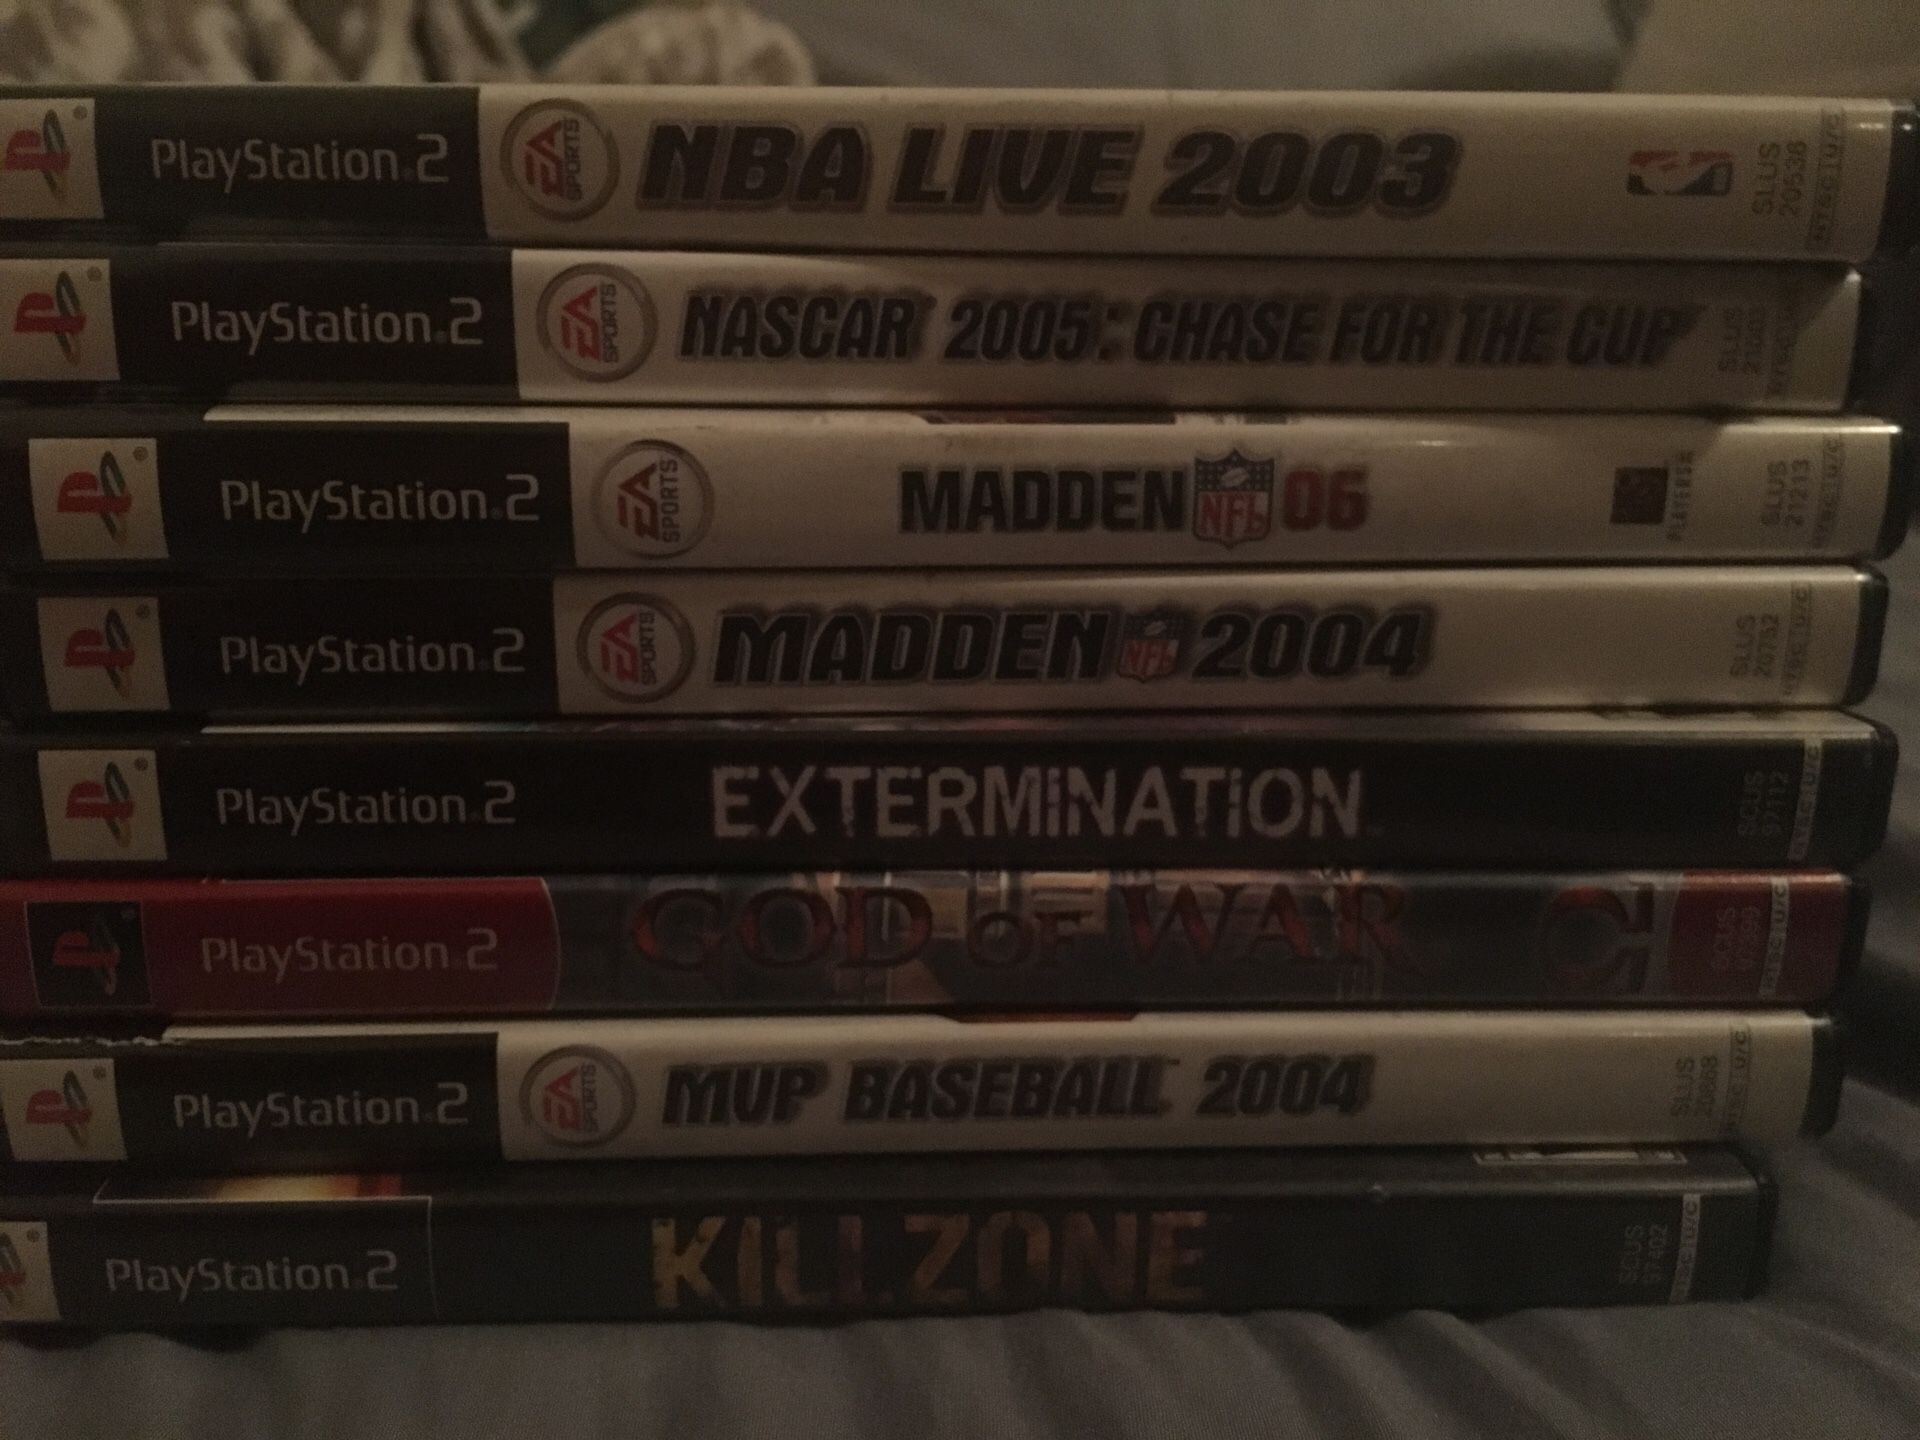 Old ps2 games $50 for all of them